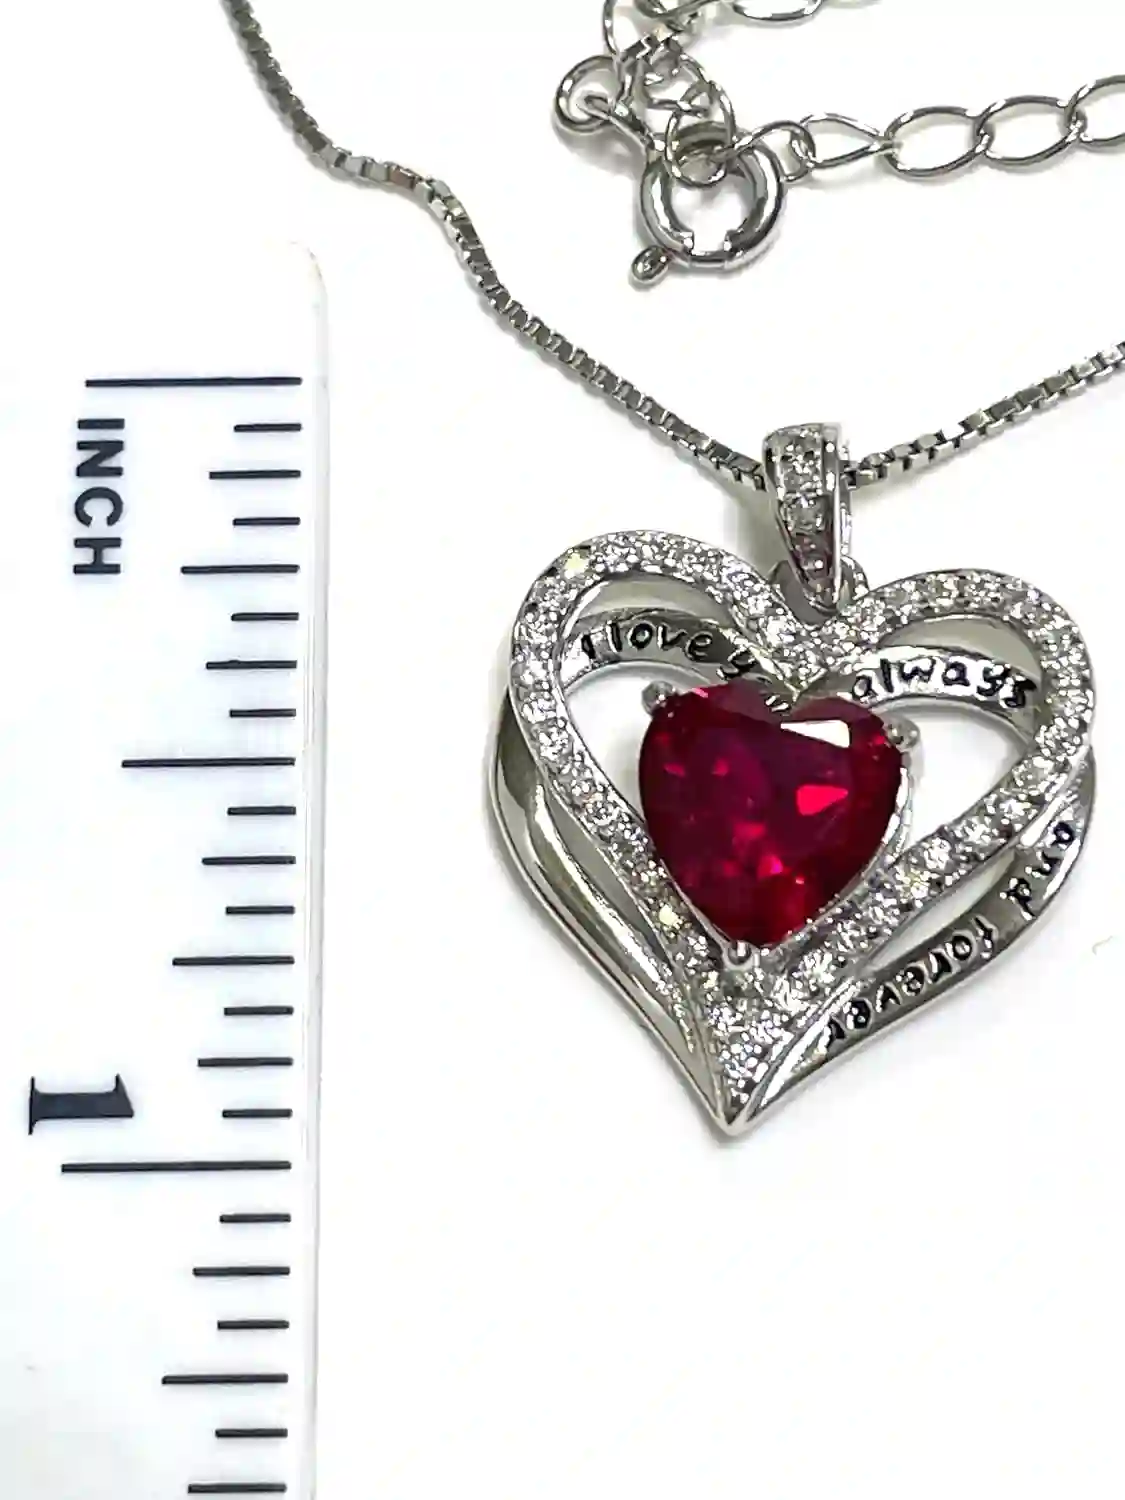 3.2ctw Natural Ruby Heart Necklace Diamond Pendant Sapphire Jewelry gift for her September birthstone Love Pendant 18k Gold Silver Bday 